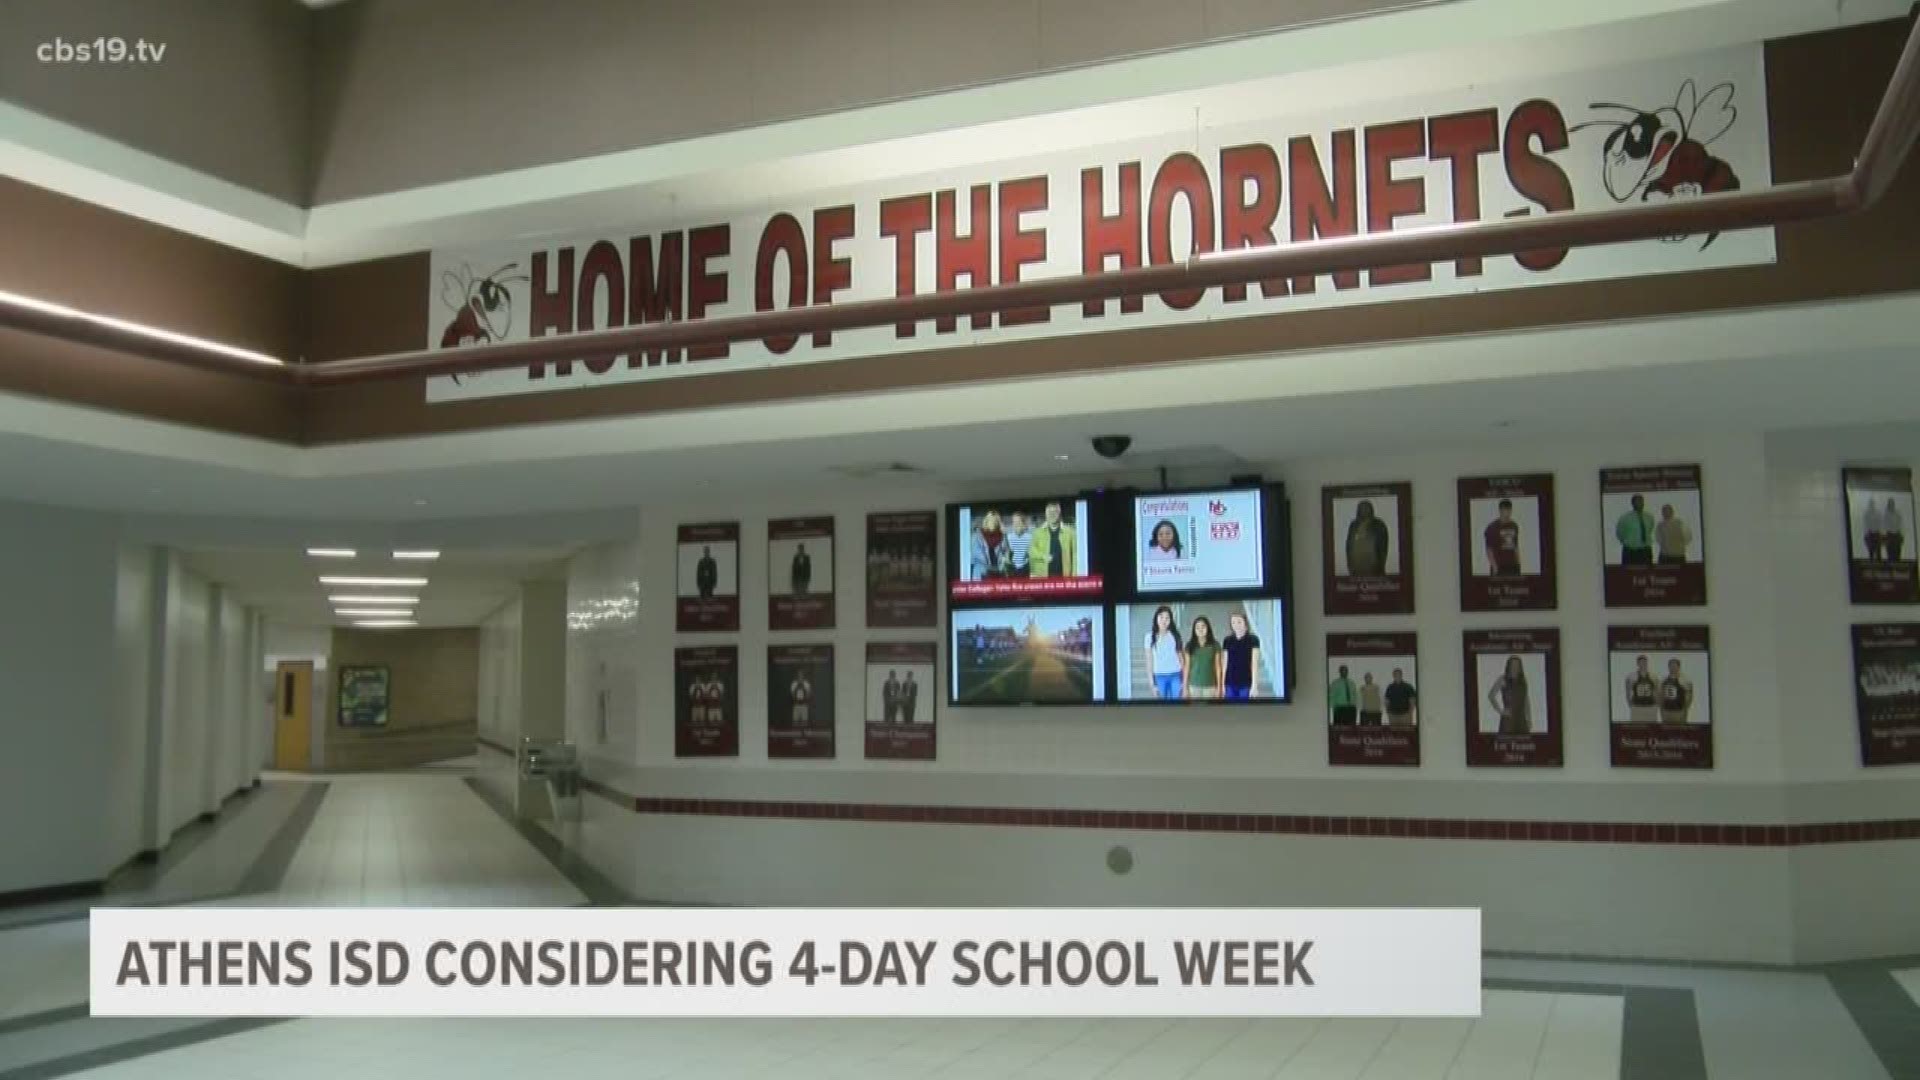 An East Texas school district is considering a shorter school week for students and staff.